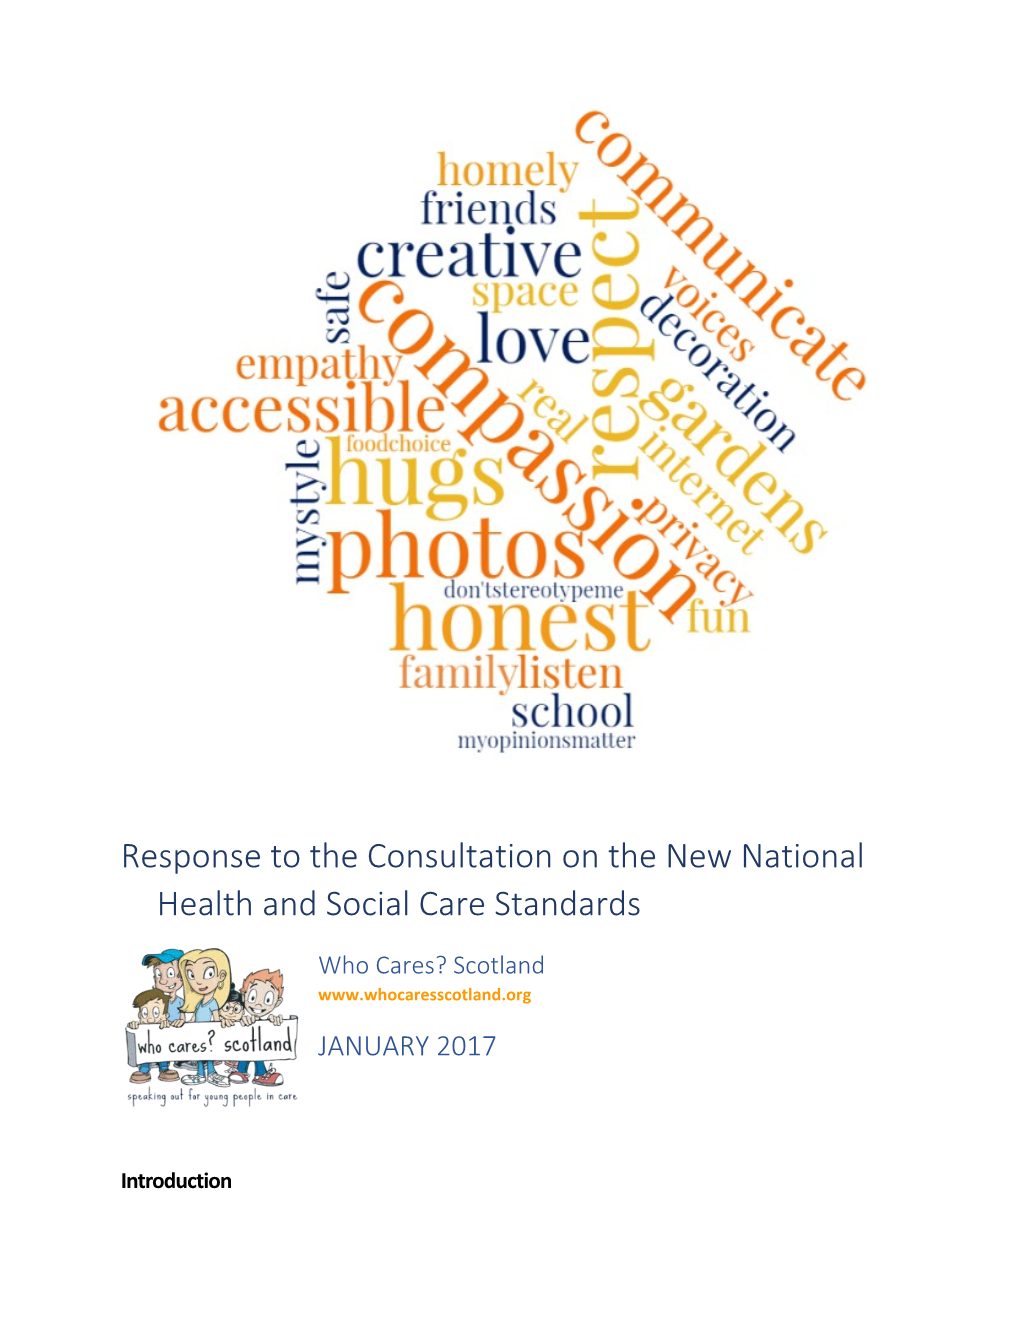 Response to the Consultation on the New National Health and Social Care Standards